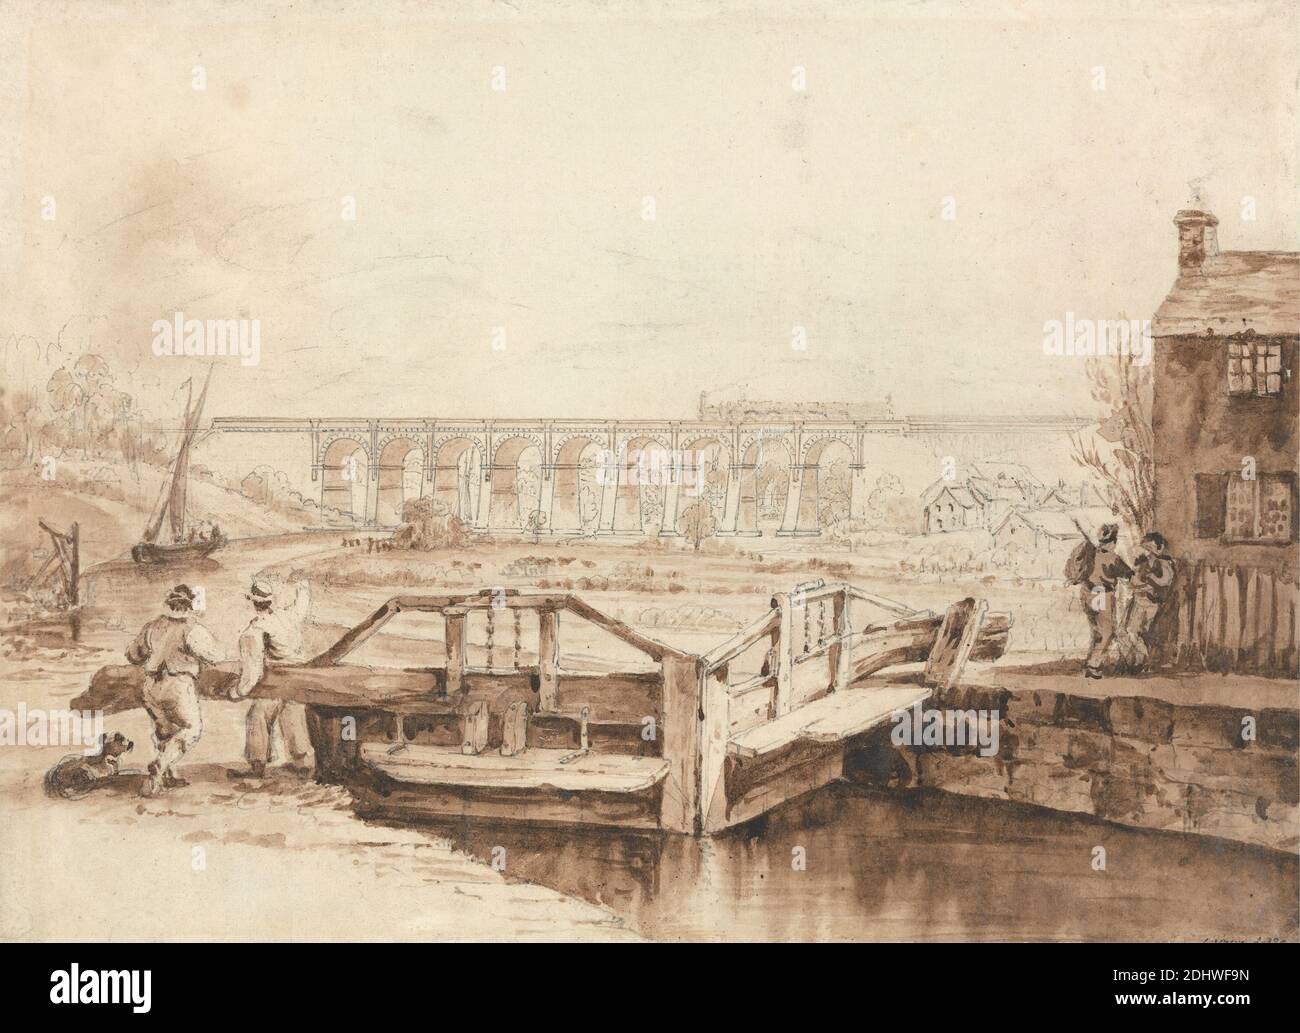 The Viaduct over the Sankey Canal, Isaac Shaw, active 1830, ca. 1830, Brown wash, brown ink, and graphite on medium, smooth, cream wove paper, Sheet: 6 1/8 × 8 7/16 inches (15.6 × 21.4 cm), architectural subject, bridge (built work), bridges, arch, bridges, railway, canal, canal boat, houses, landscape, lock, locomotive, steam, people, train, viaduct, Burtonwood, Cheshire, Earlestown, England, Newton-le-Willows, Saint Helens, Saint Helens Canal, Sankey Brook, United Kingdom, Warrington Stock Photo